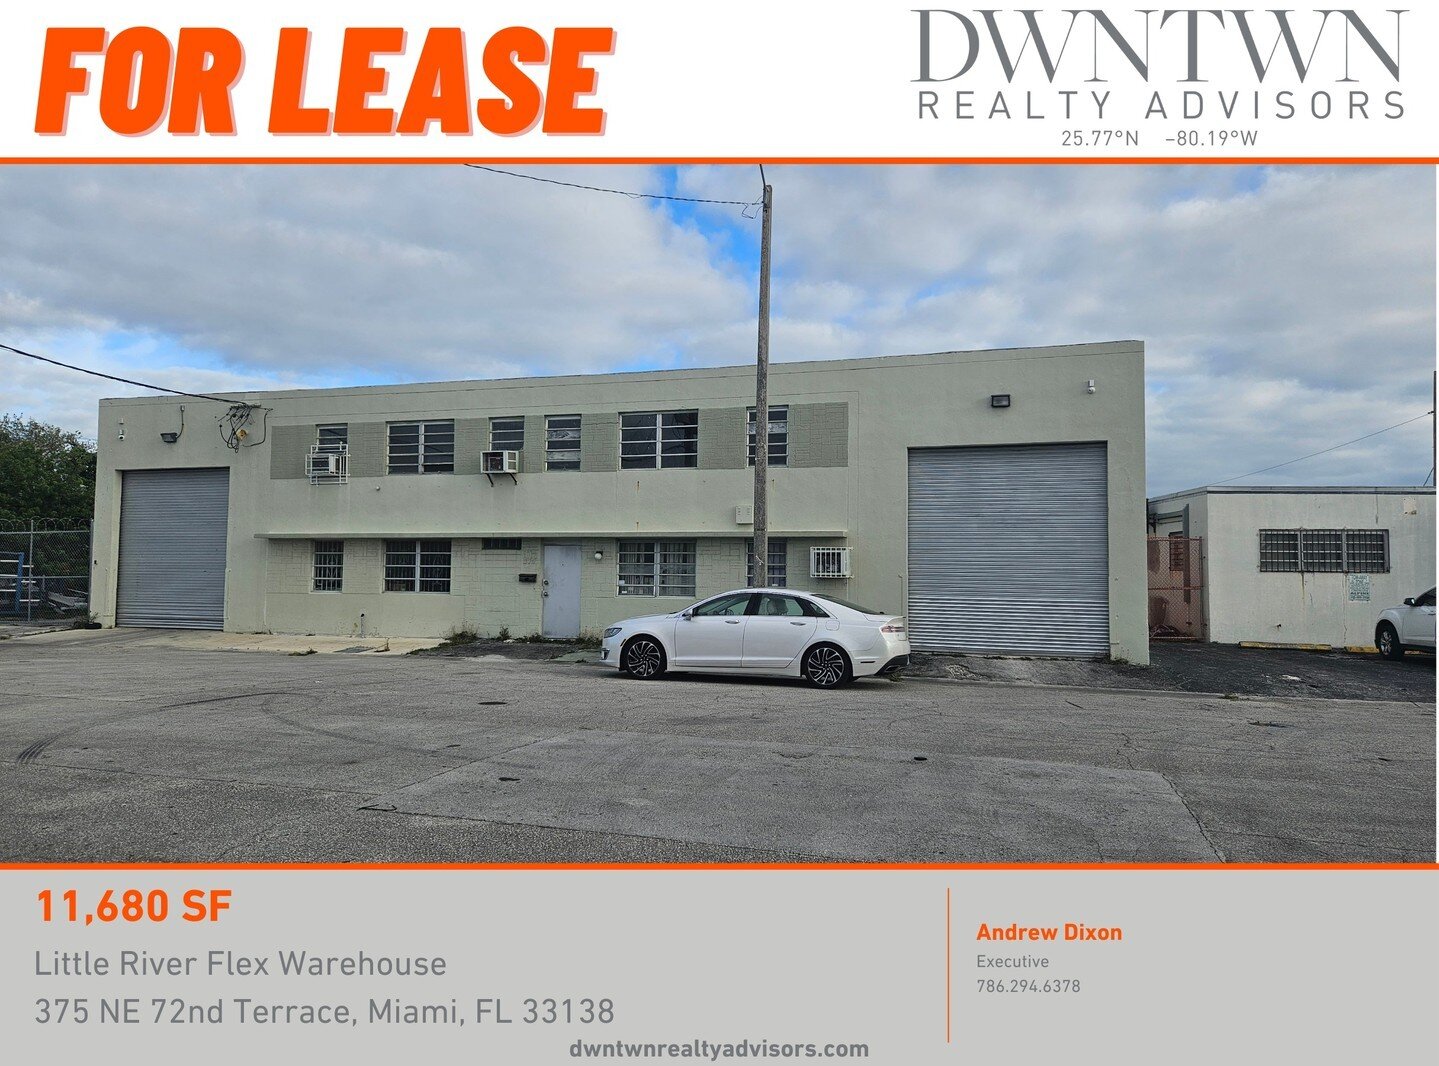 JUST LISTED FOR LEASE | Little River Flex Warehouse

DWNTWN Realty Advisors has been retained exclusively to arrange the leasing of 375 NE 72nd Terrace in Miami, FL. Located in booming Little River, this property is right next to Rail 71. The locatio